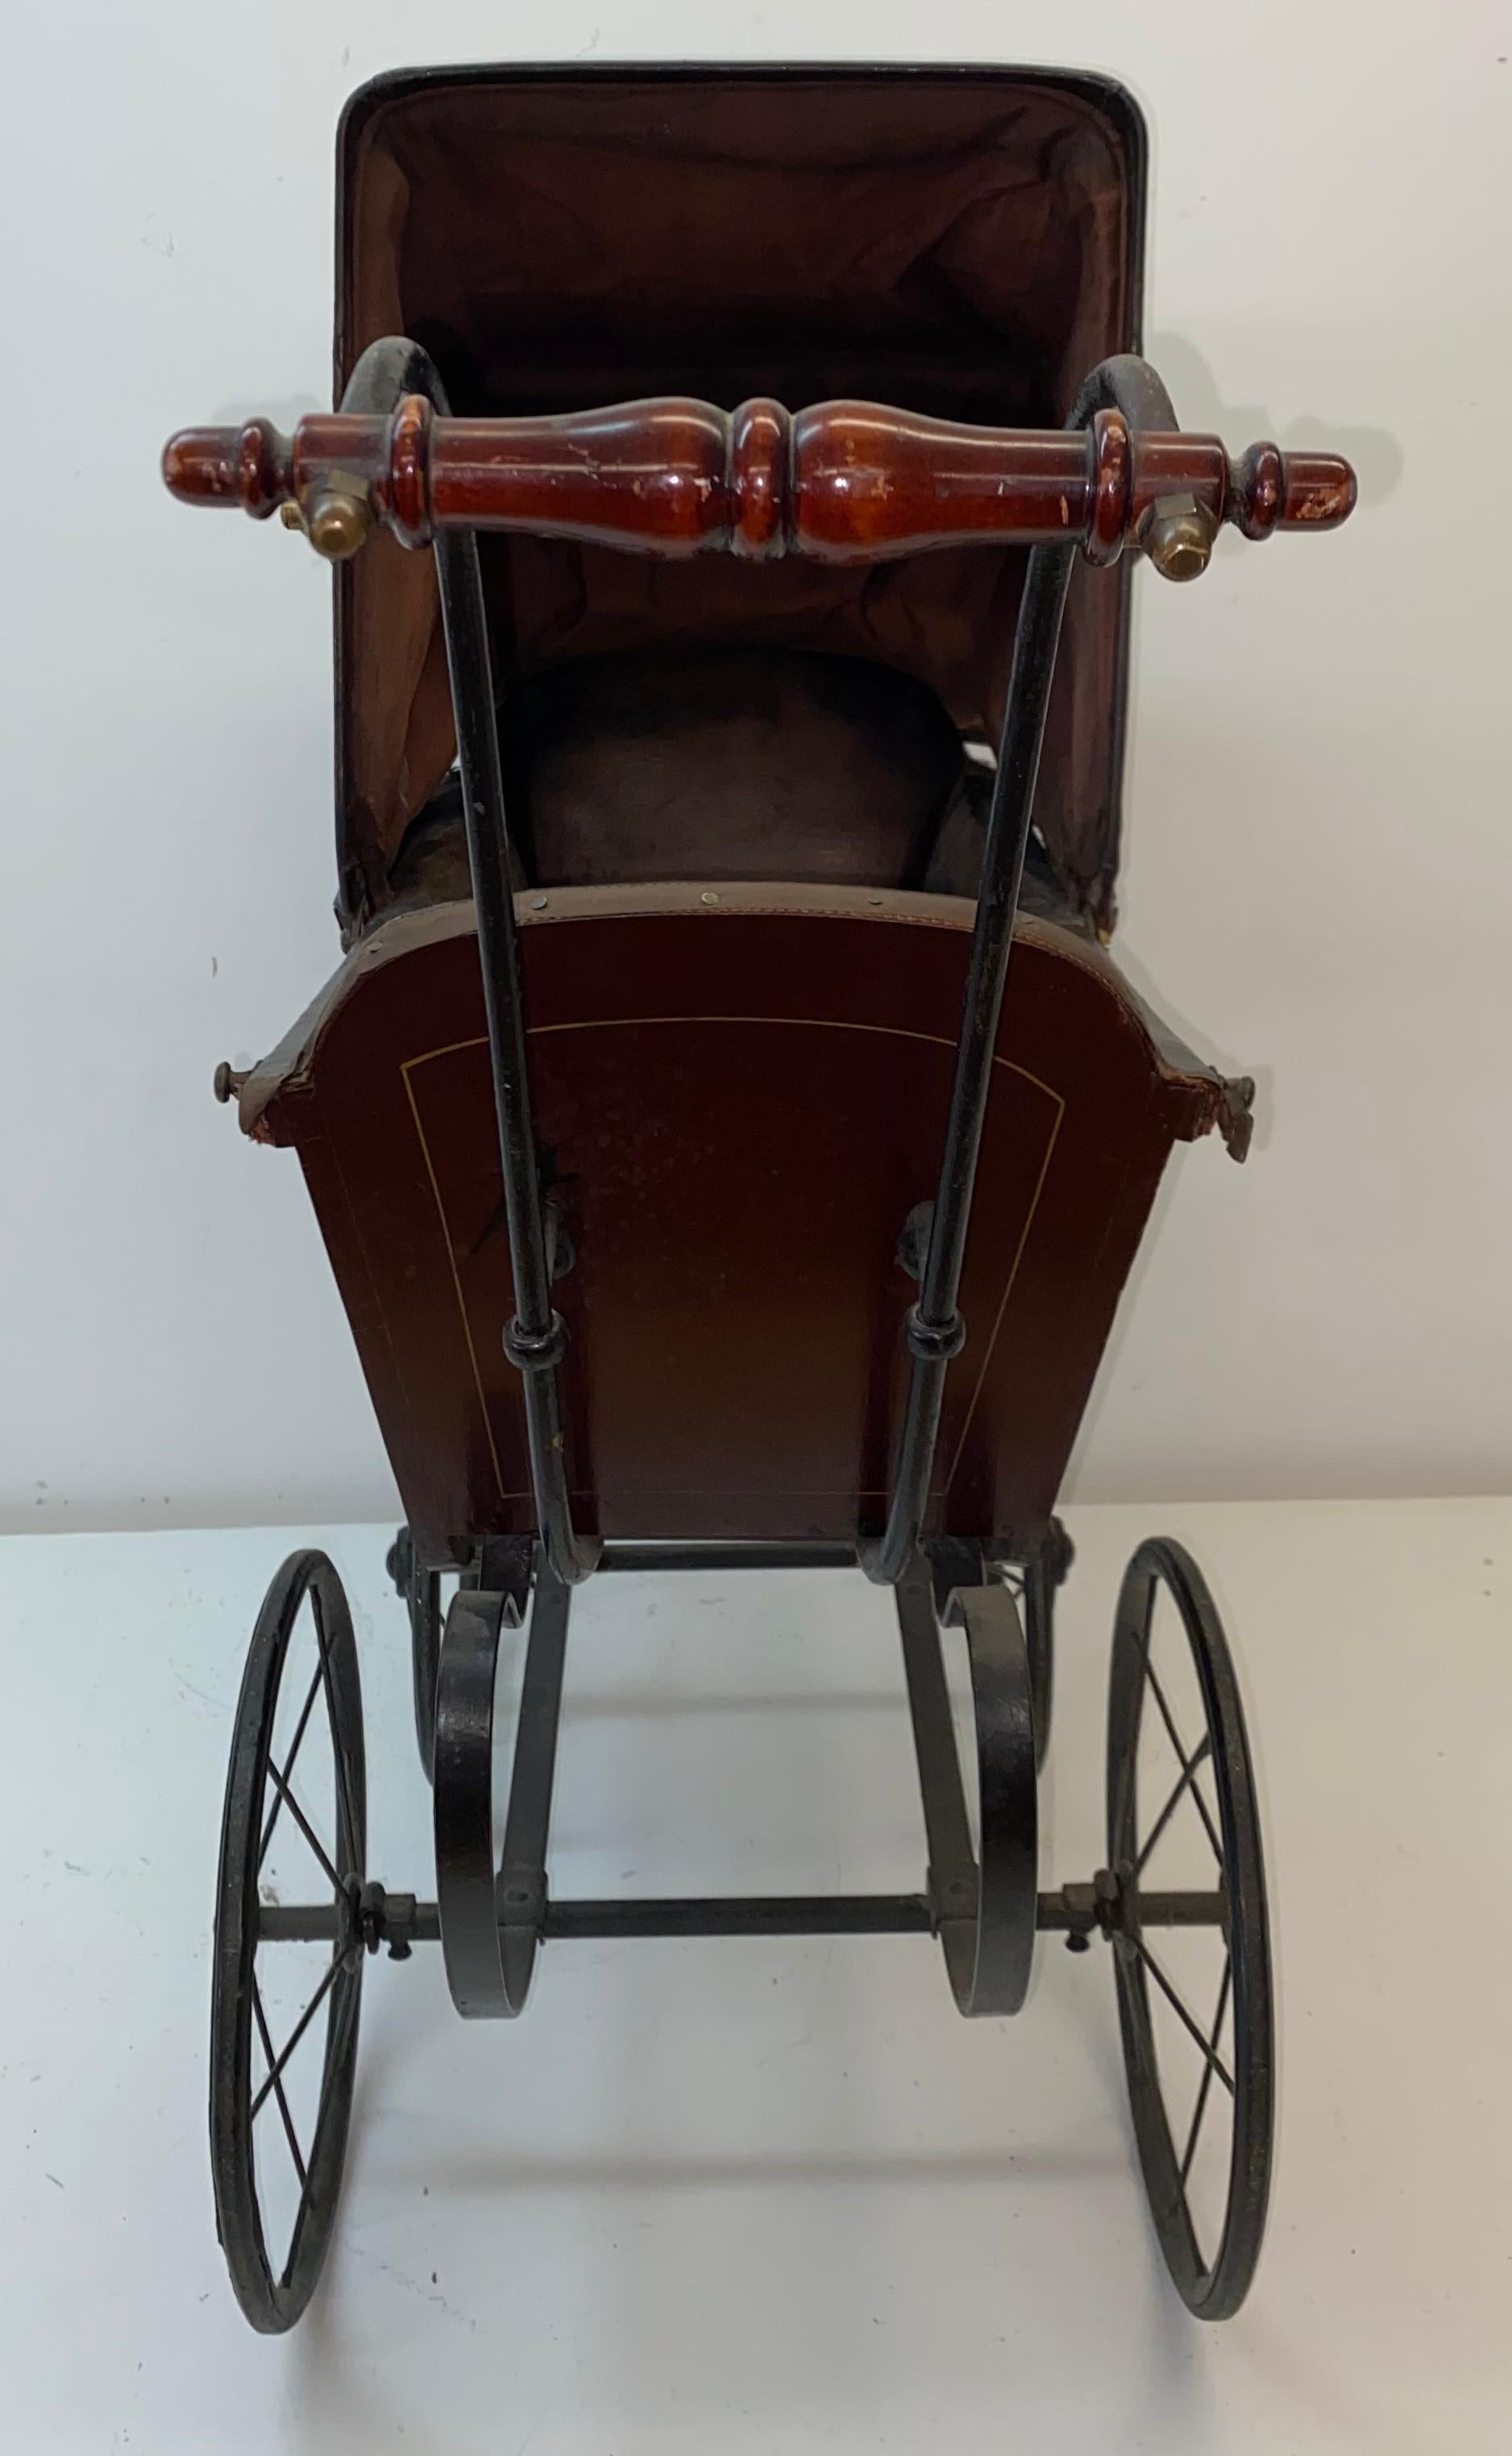 Mid 19th century baby carriage / stroller by F. A. Whitney, Leominster, Massachusetts 

Leather and metal baby carriage

For display, or your doll collection

This fine baby carriage was made for an infant and was the highest quality of it's